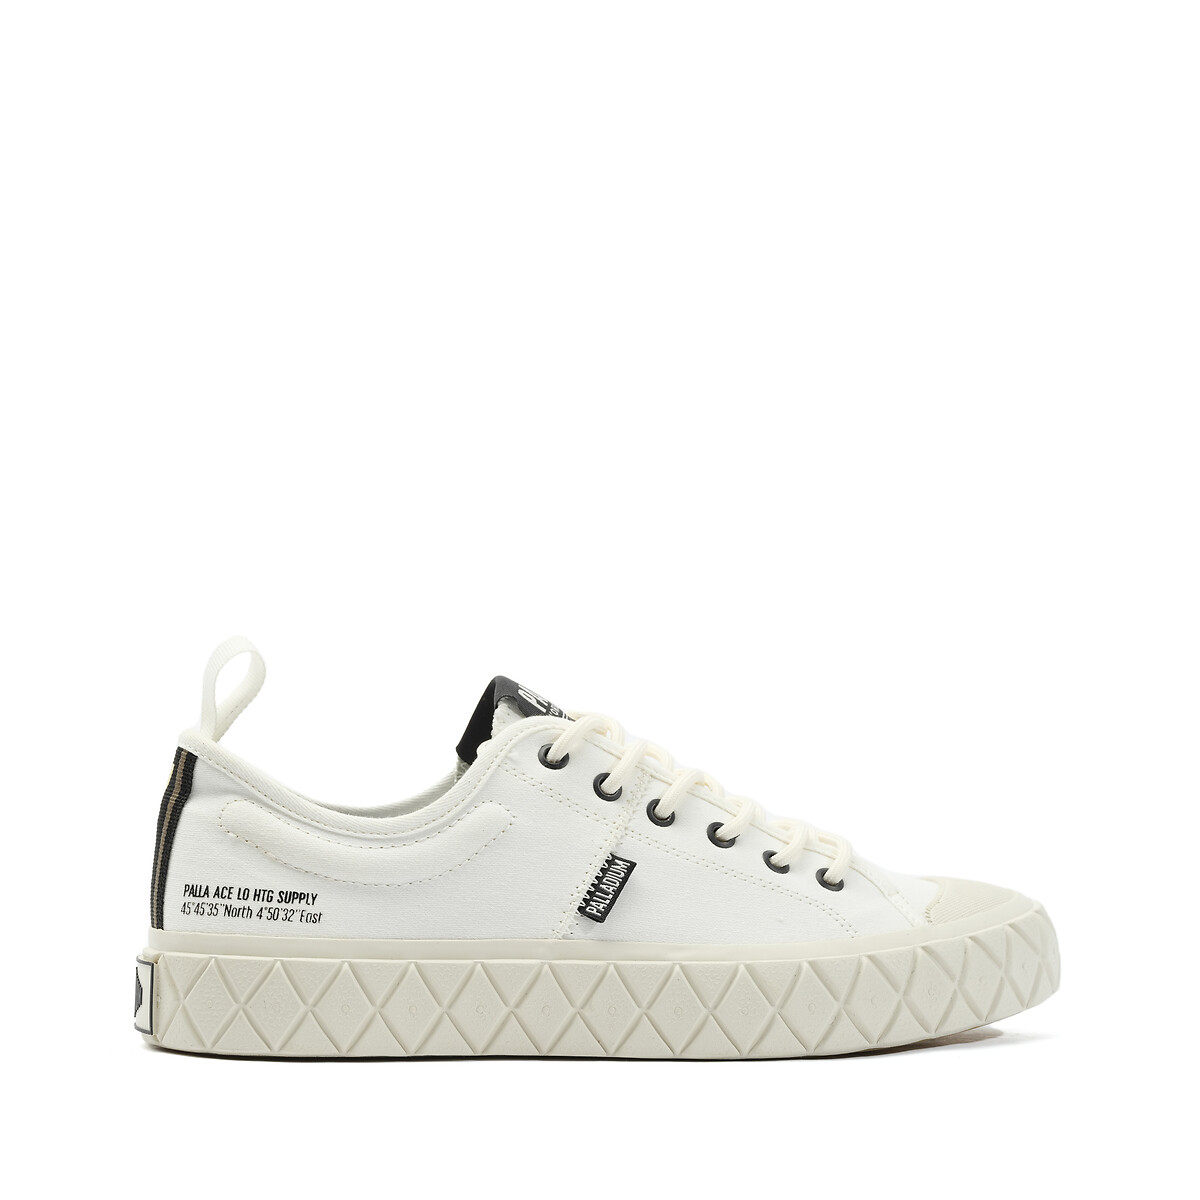 Palla Ace Low Supply Trainers in Canvas